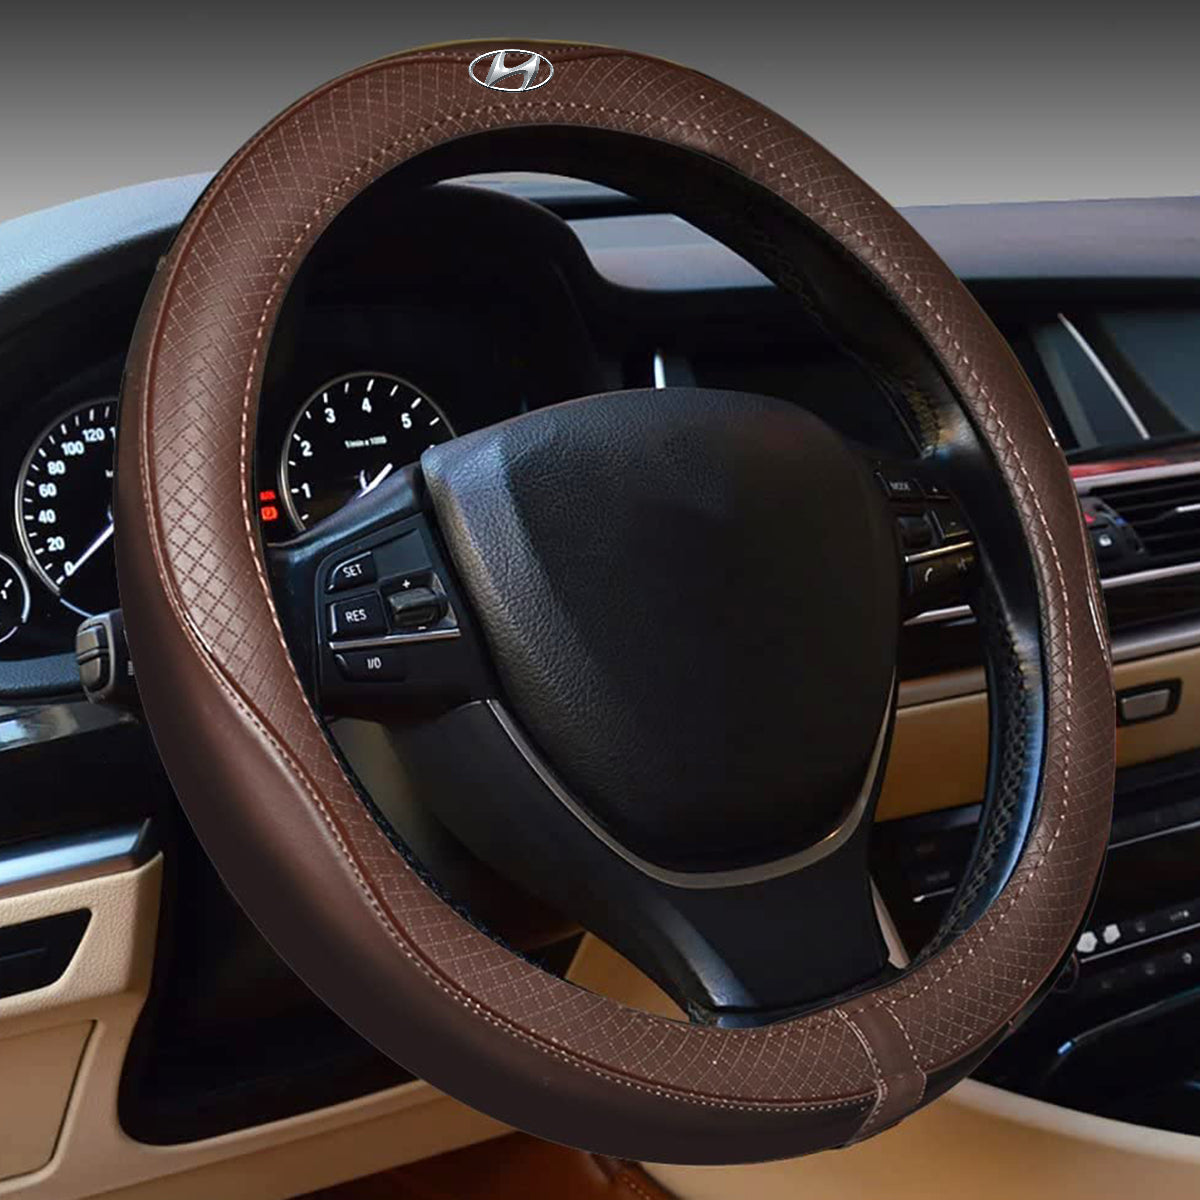 Enhance Your Ride with a Stylish Hyundai Steering Wheel Cover